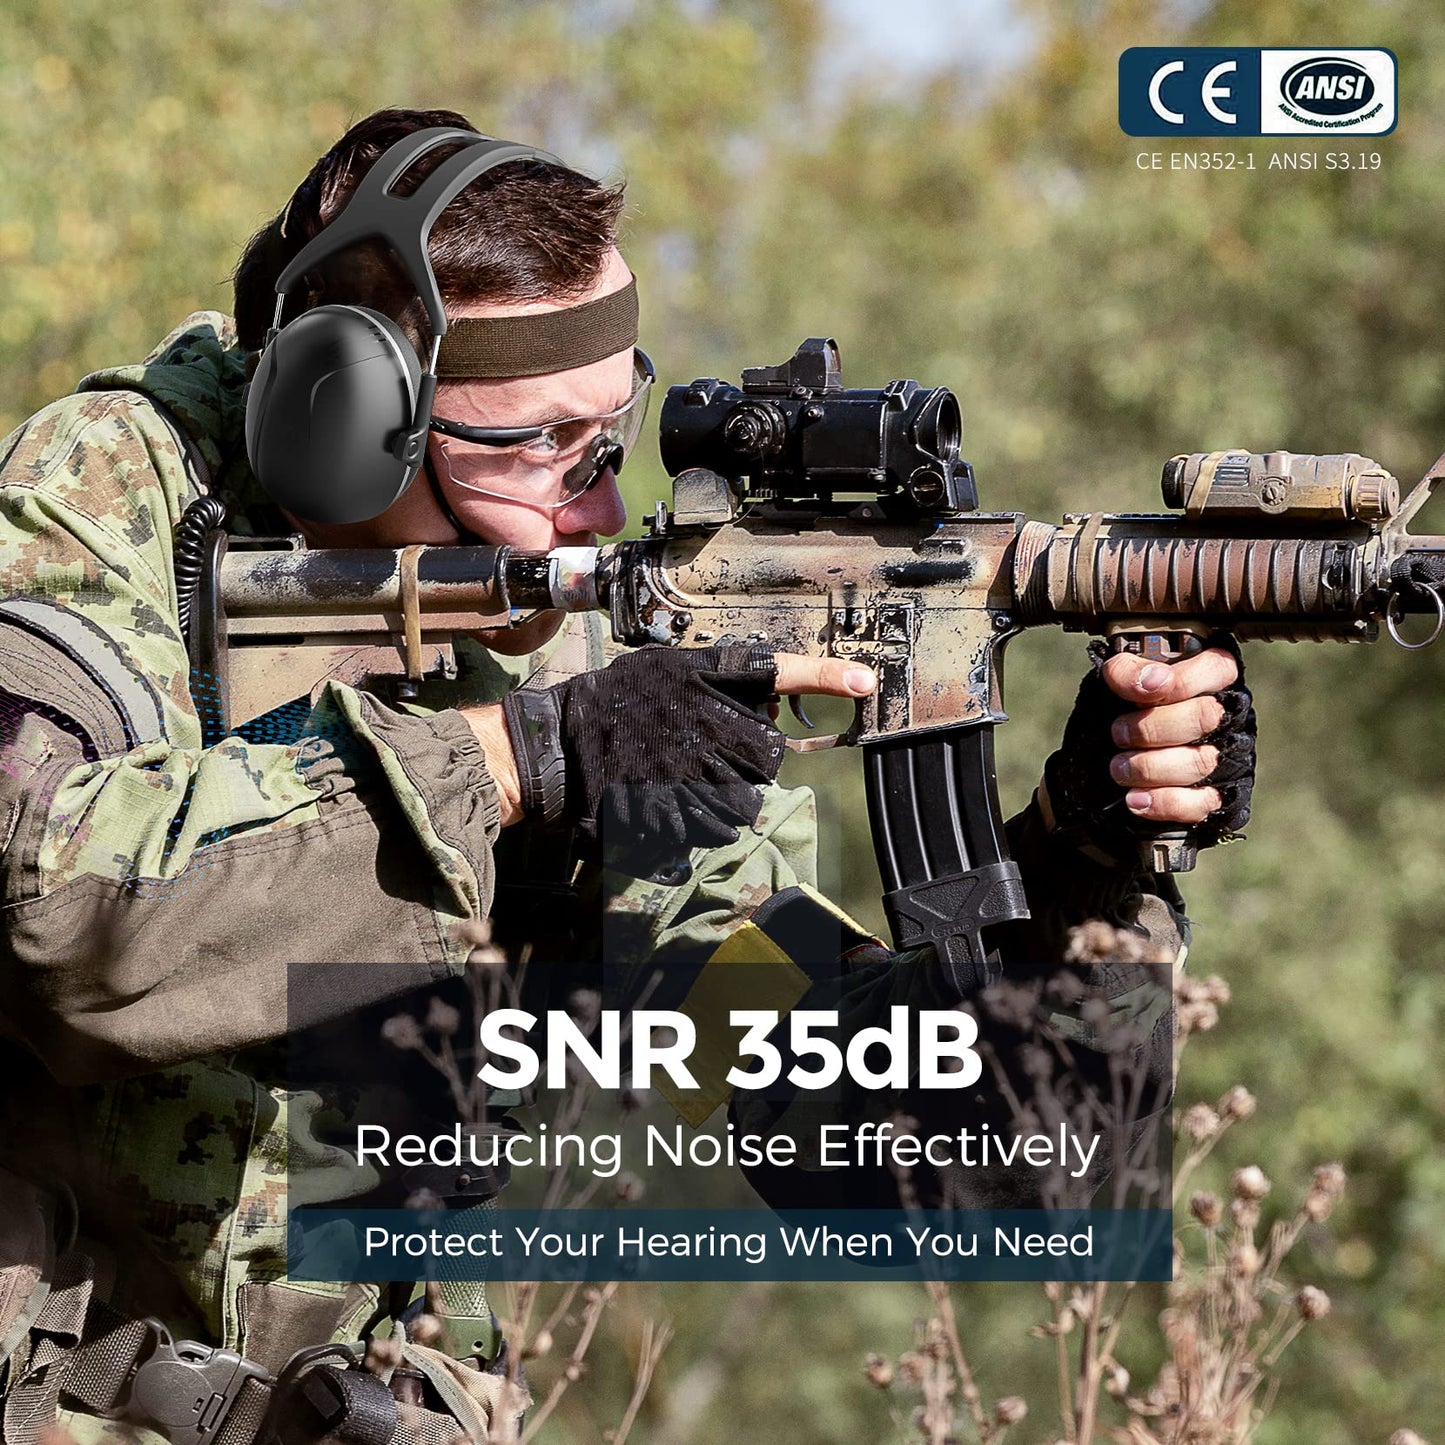 SNR35dB Hearing Protection Ear Muffs for Noise Reduction, Effective Ear Protection, Noise Cancelling Ear Muffs, Ear Protection for Shooting, Mowing,